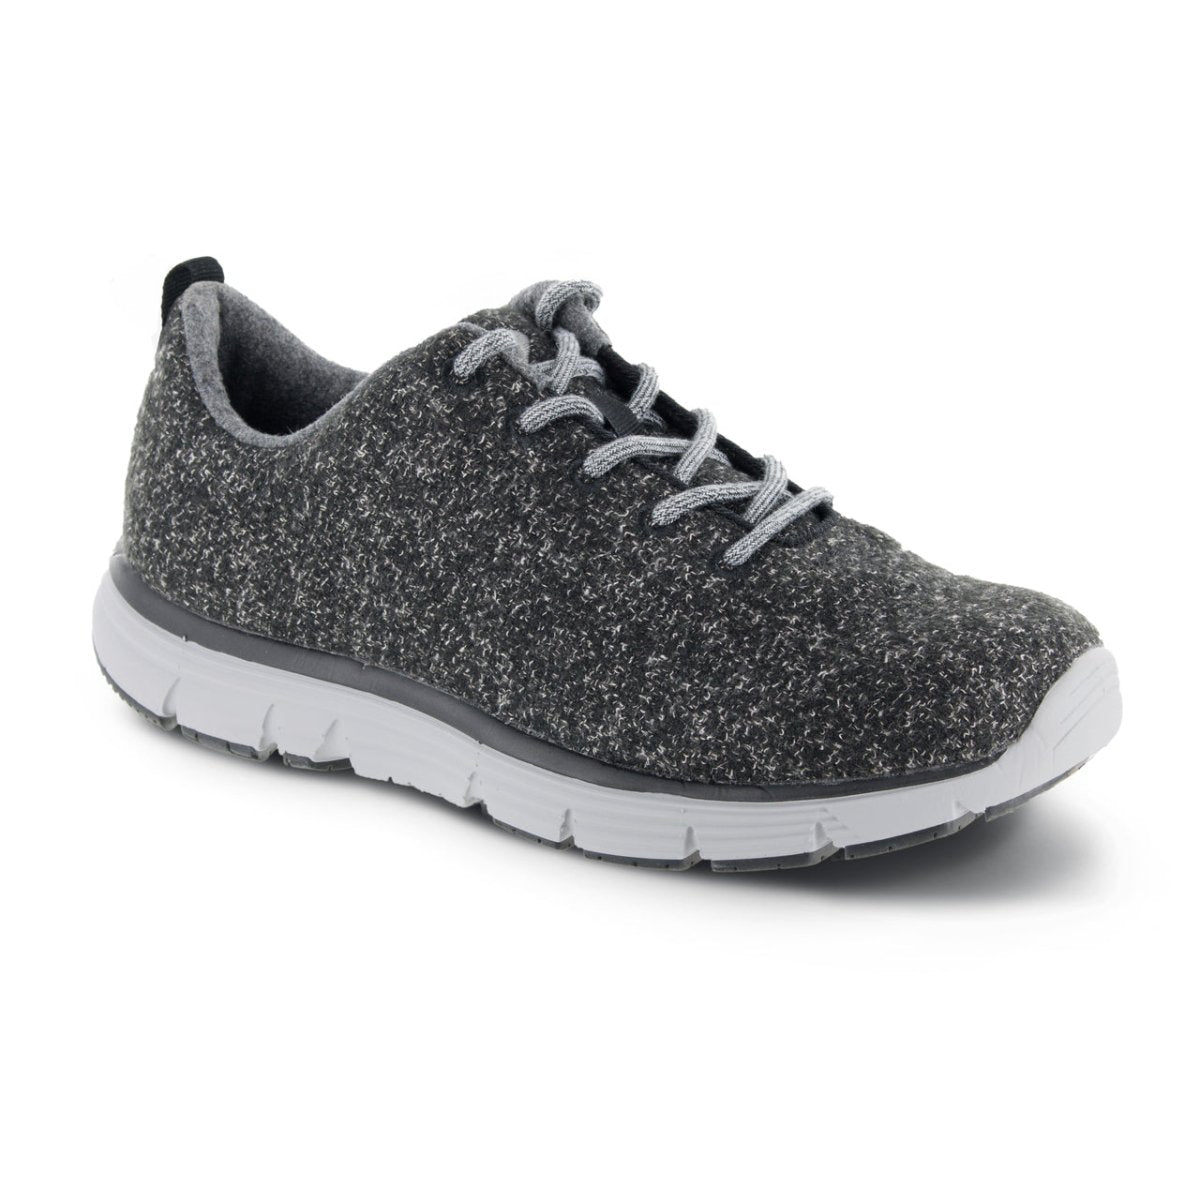 APEX A8100W NATURAL WOOL KNIT WOMEN'S CASUAL SHOE IN DARK GRAY - TLW Shoes